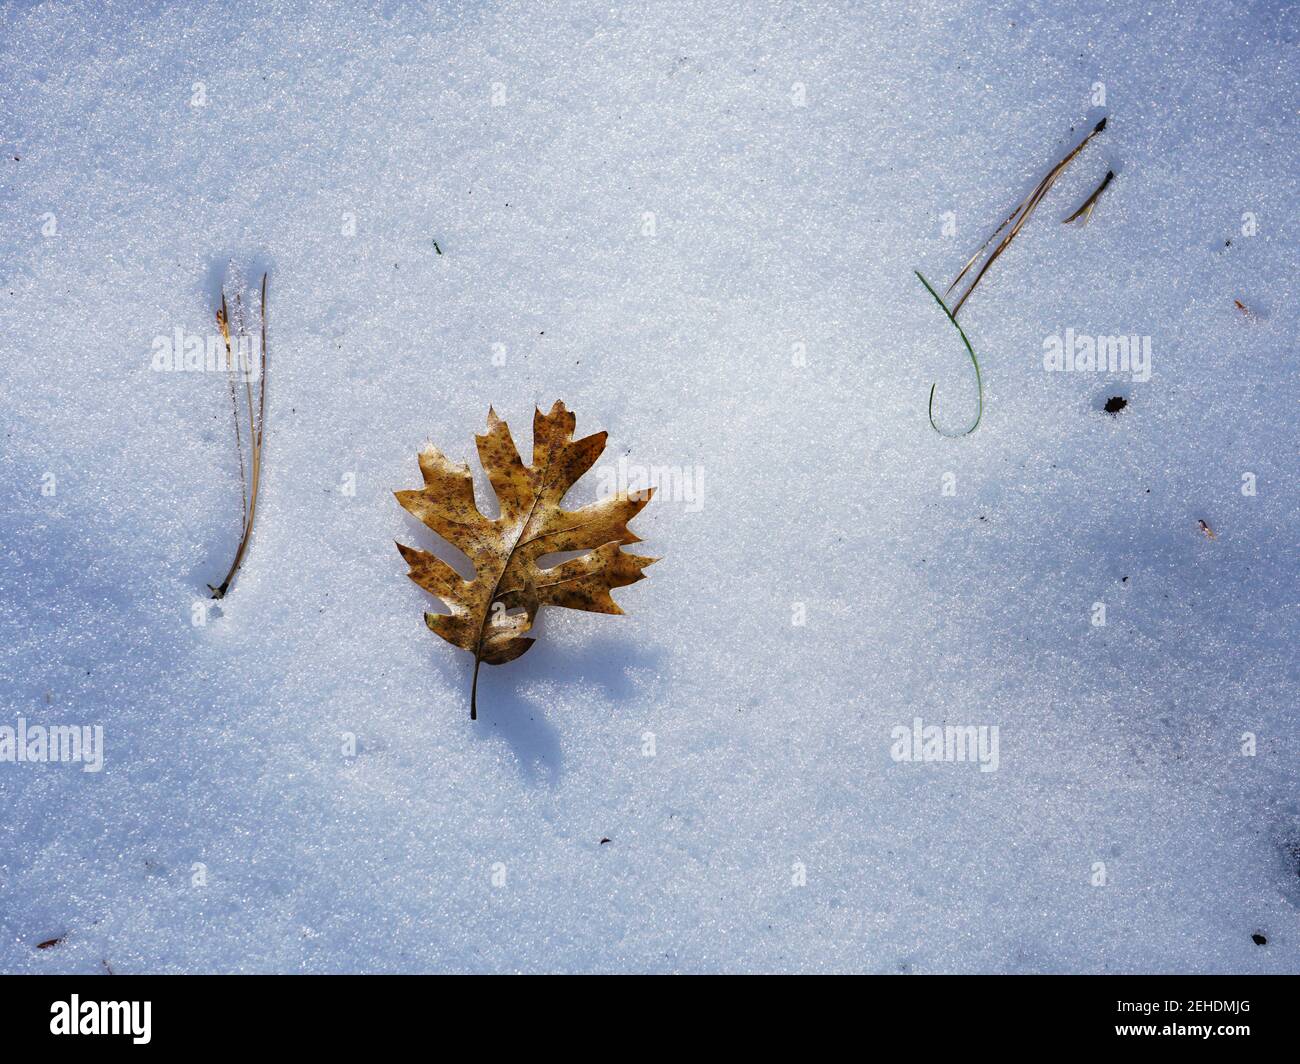 High Angle View of Fallen oak leaf and pine needle on snow Stock Photo